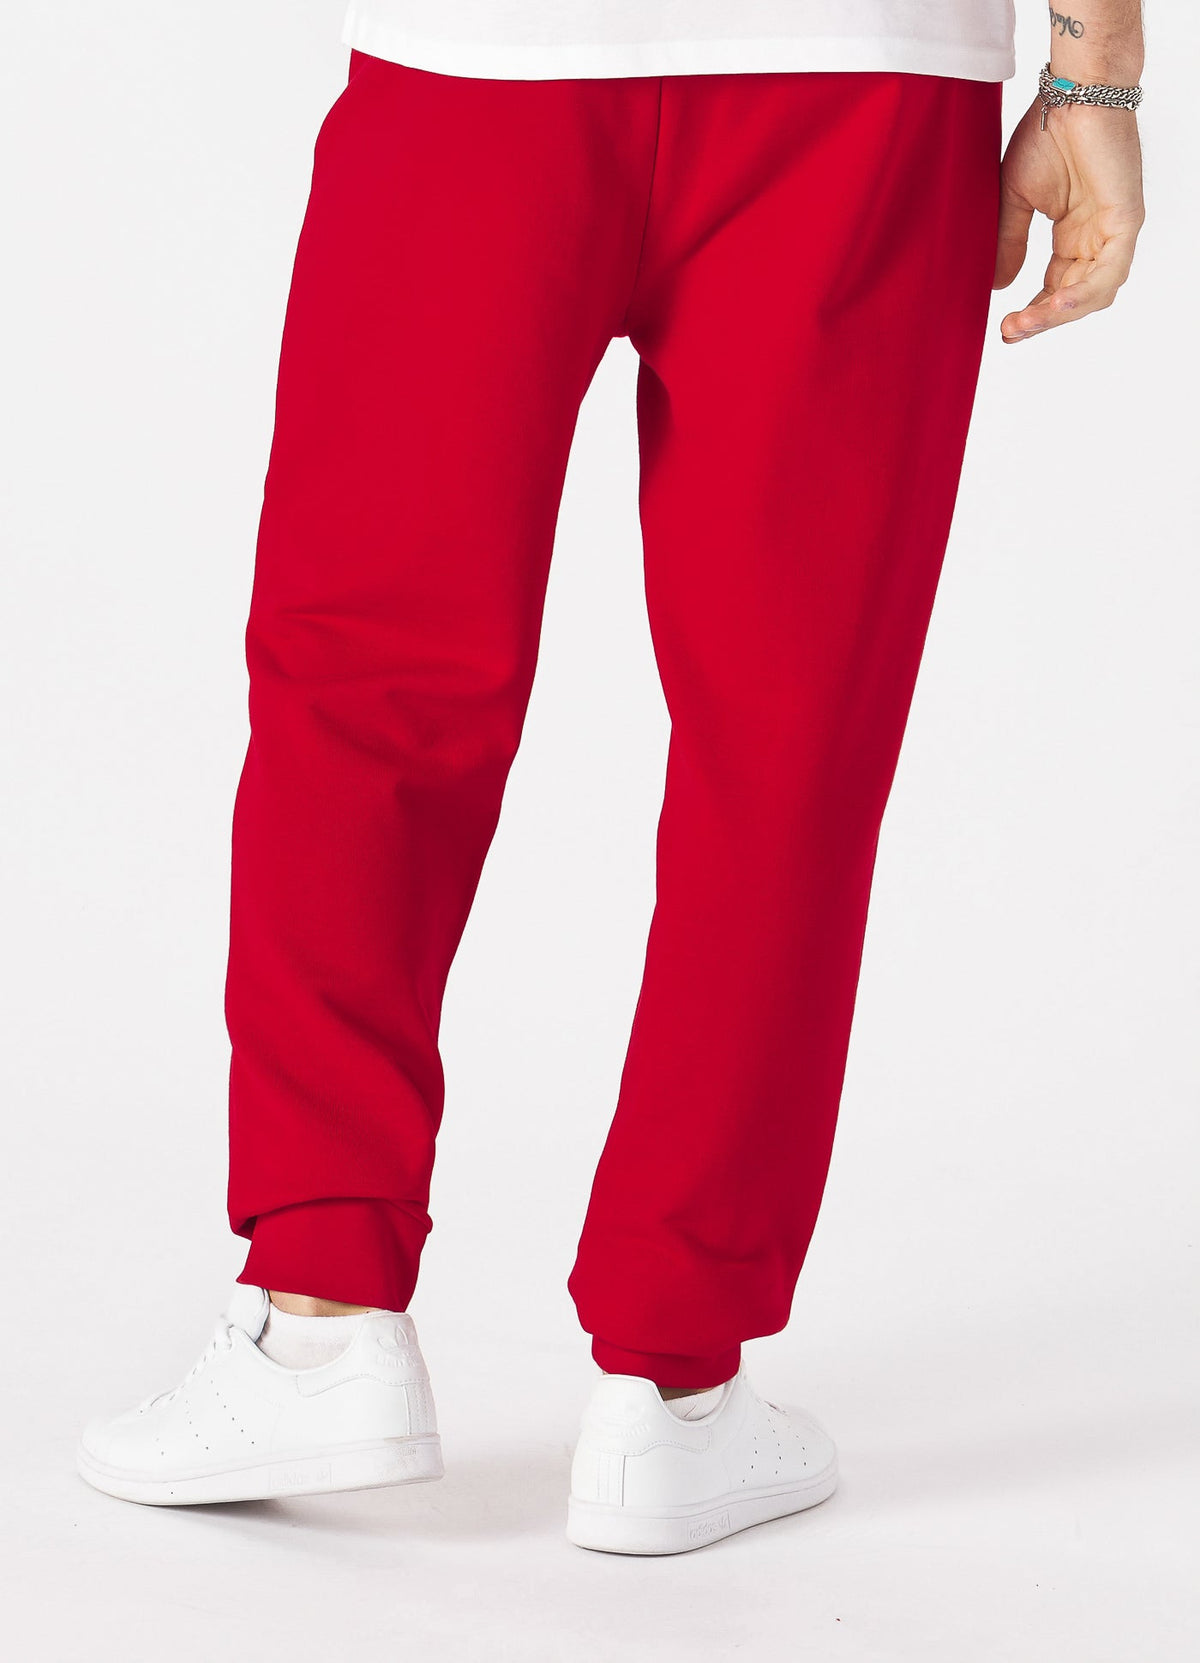 TERRY NEW LOGO Red Track Pants.